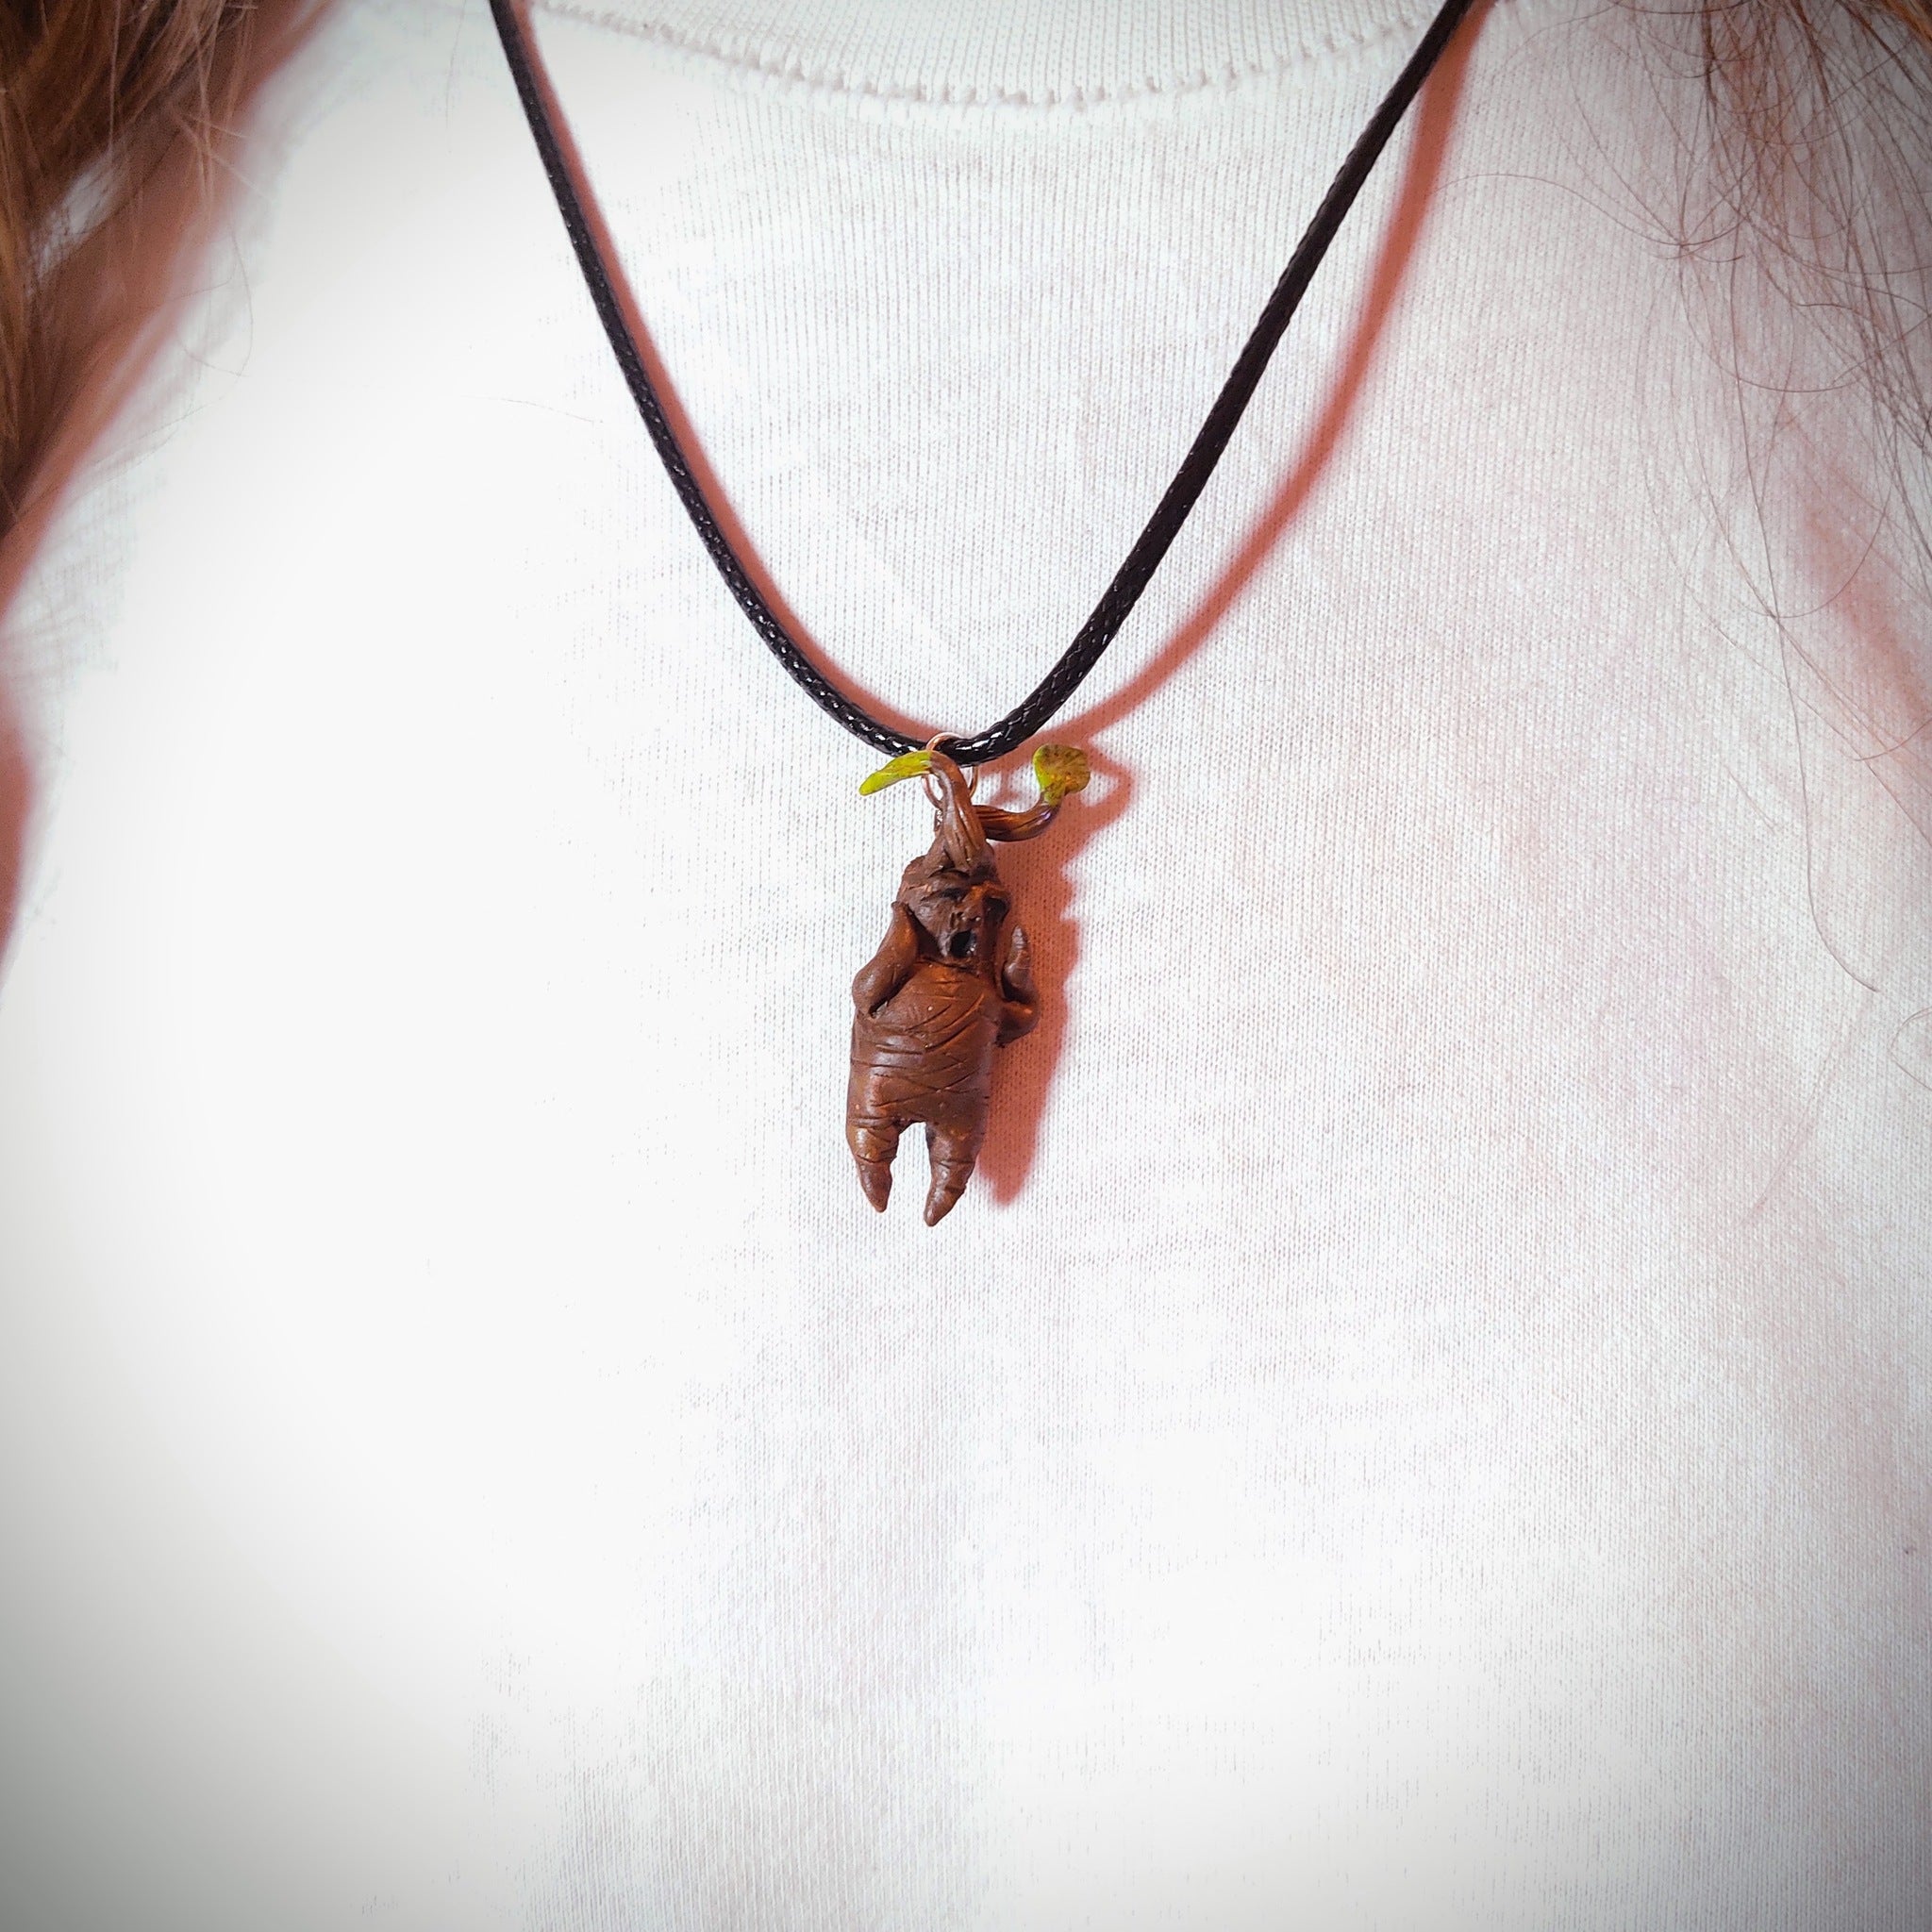 Brother Bear Wolf Totem Necklace Review Made By CreationsByHailey Etsy Shop  :D - YouTube